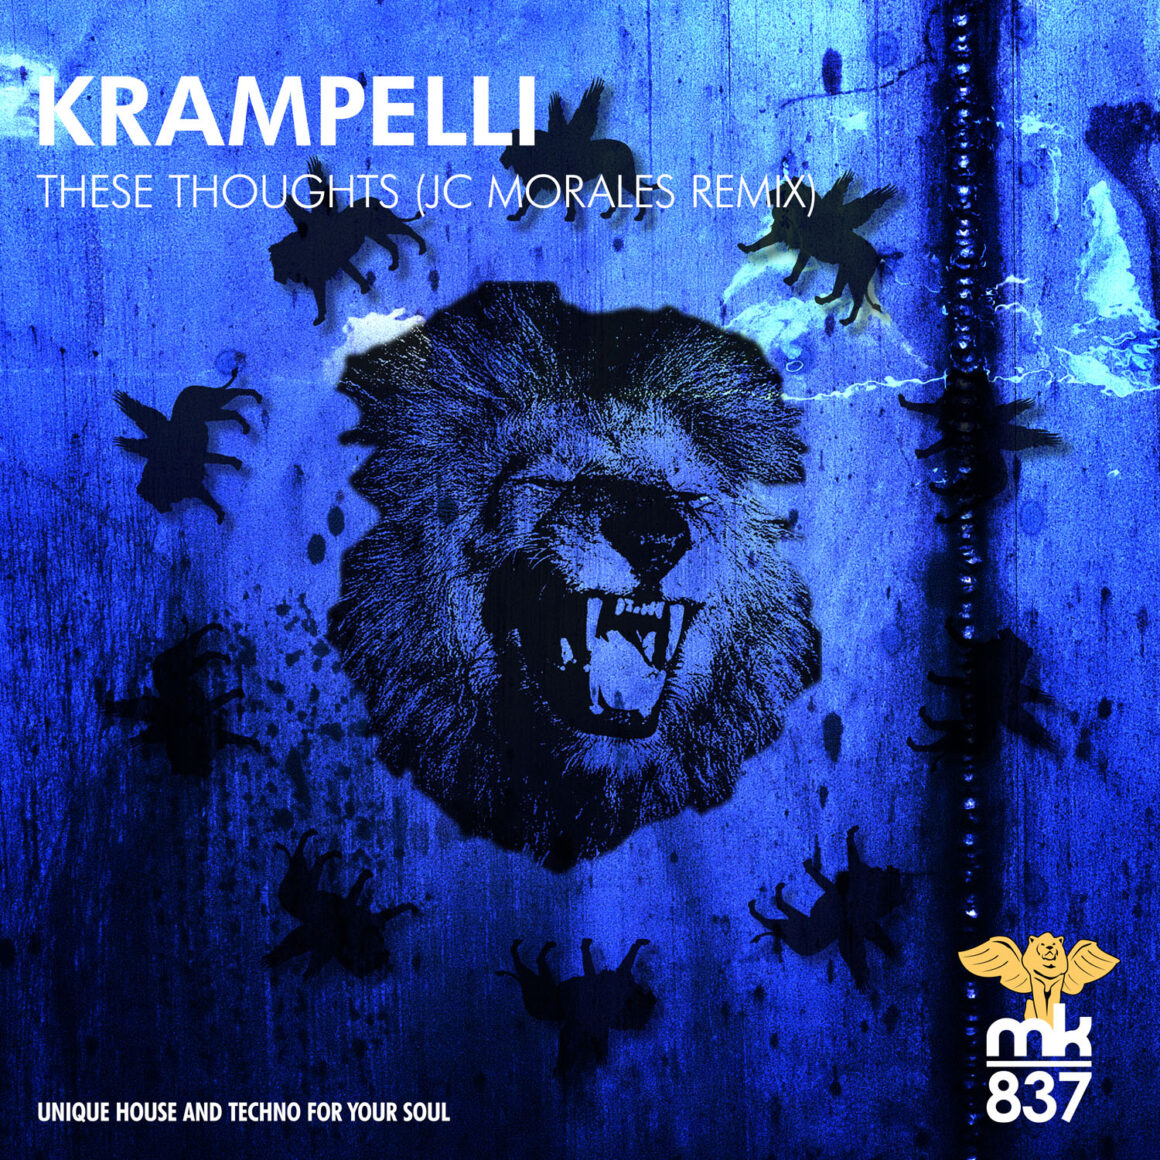 Krampelli - These Thoughts (JC Morales Remix)